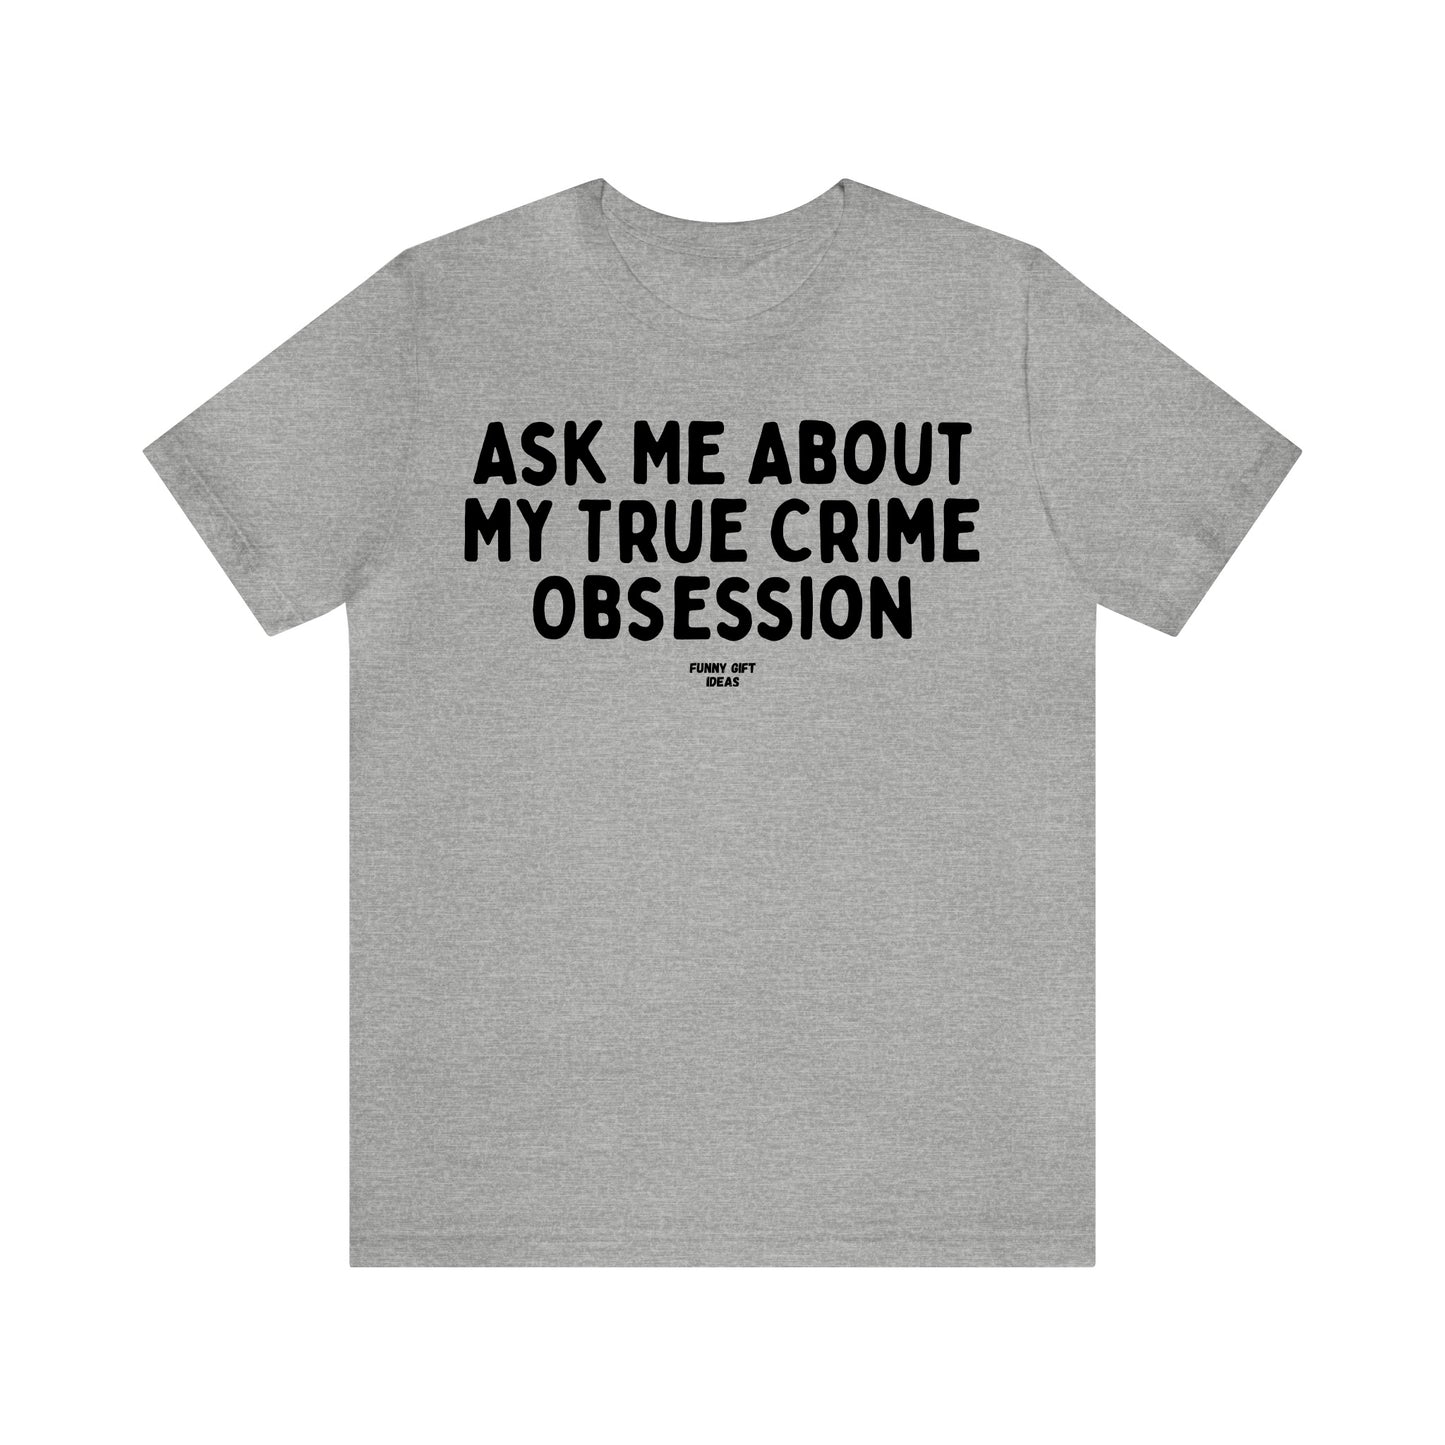 Funny Shirts for Women - Ask Me About My True Crime Obsession - Women's T Shirts